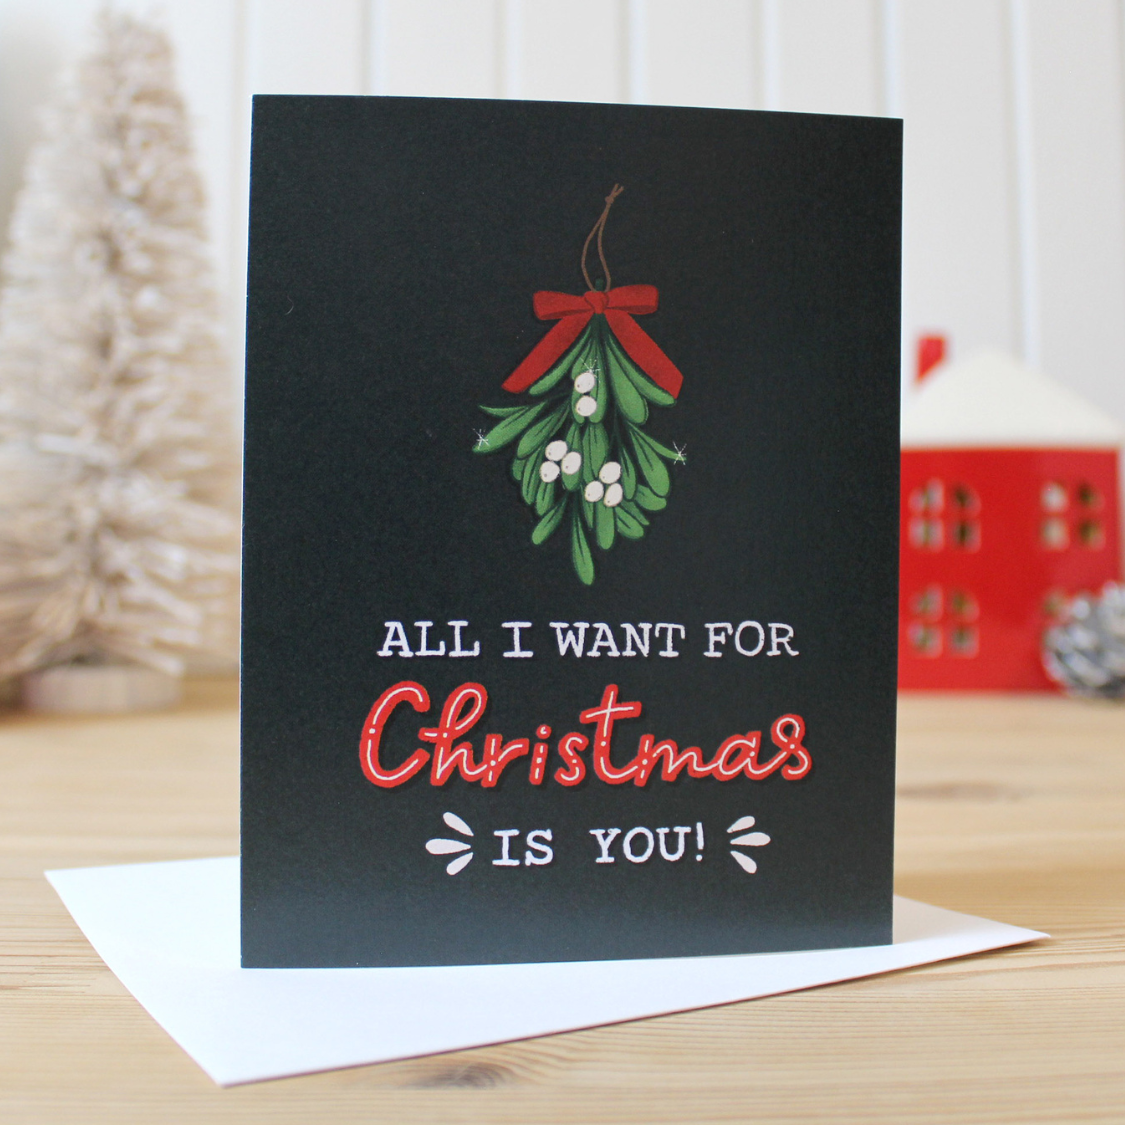 NEW! All I Want For Christmas Is You Mistletoe